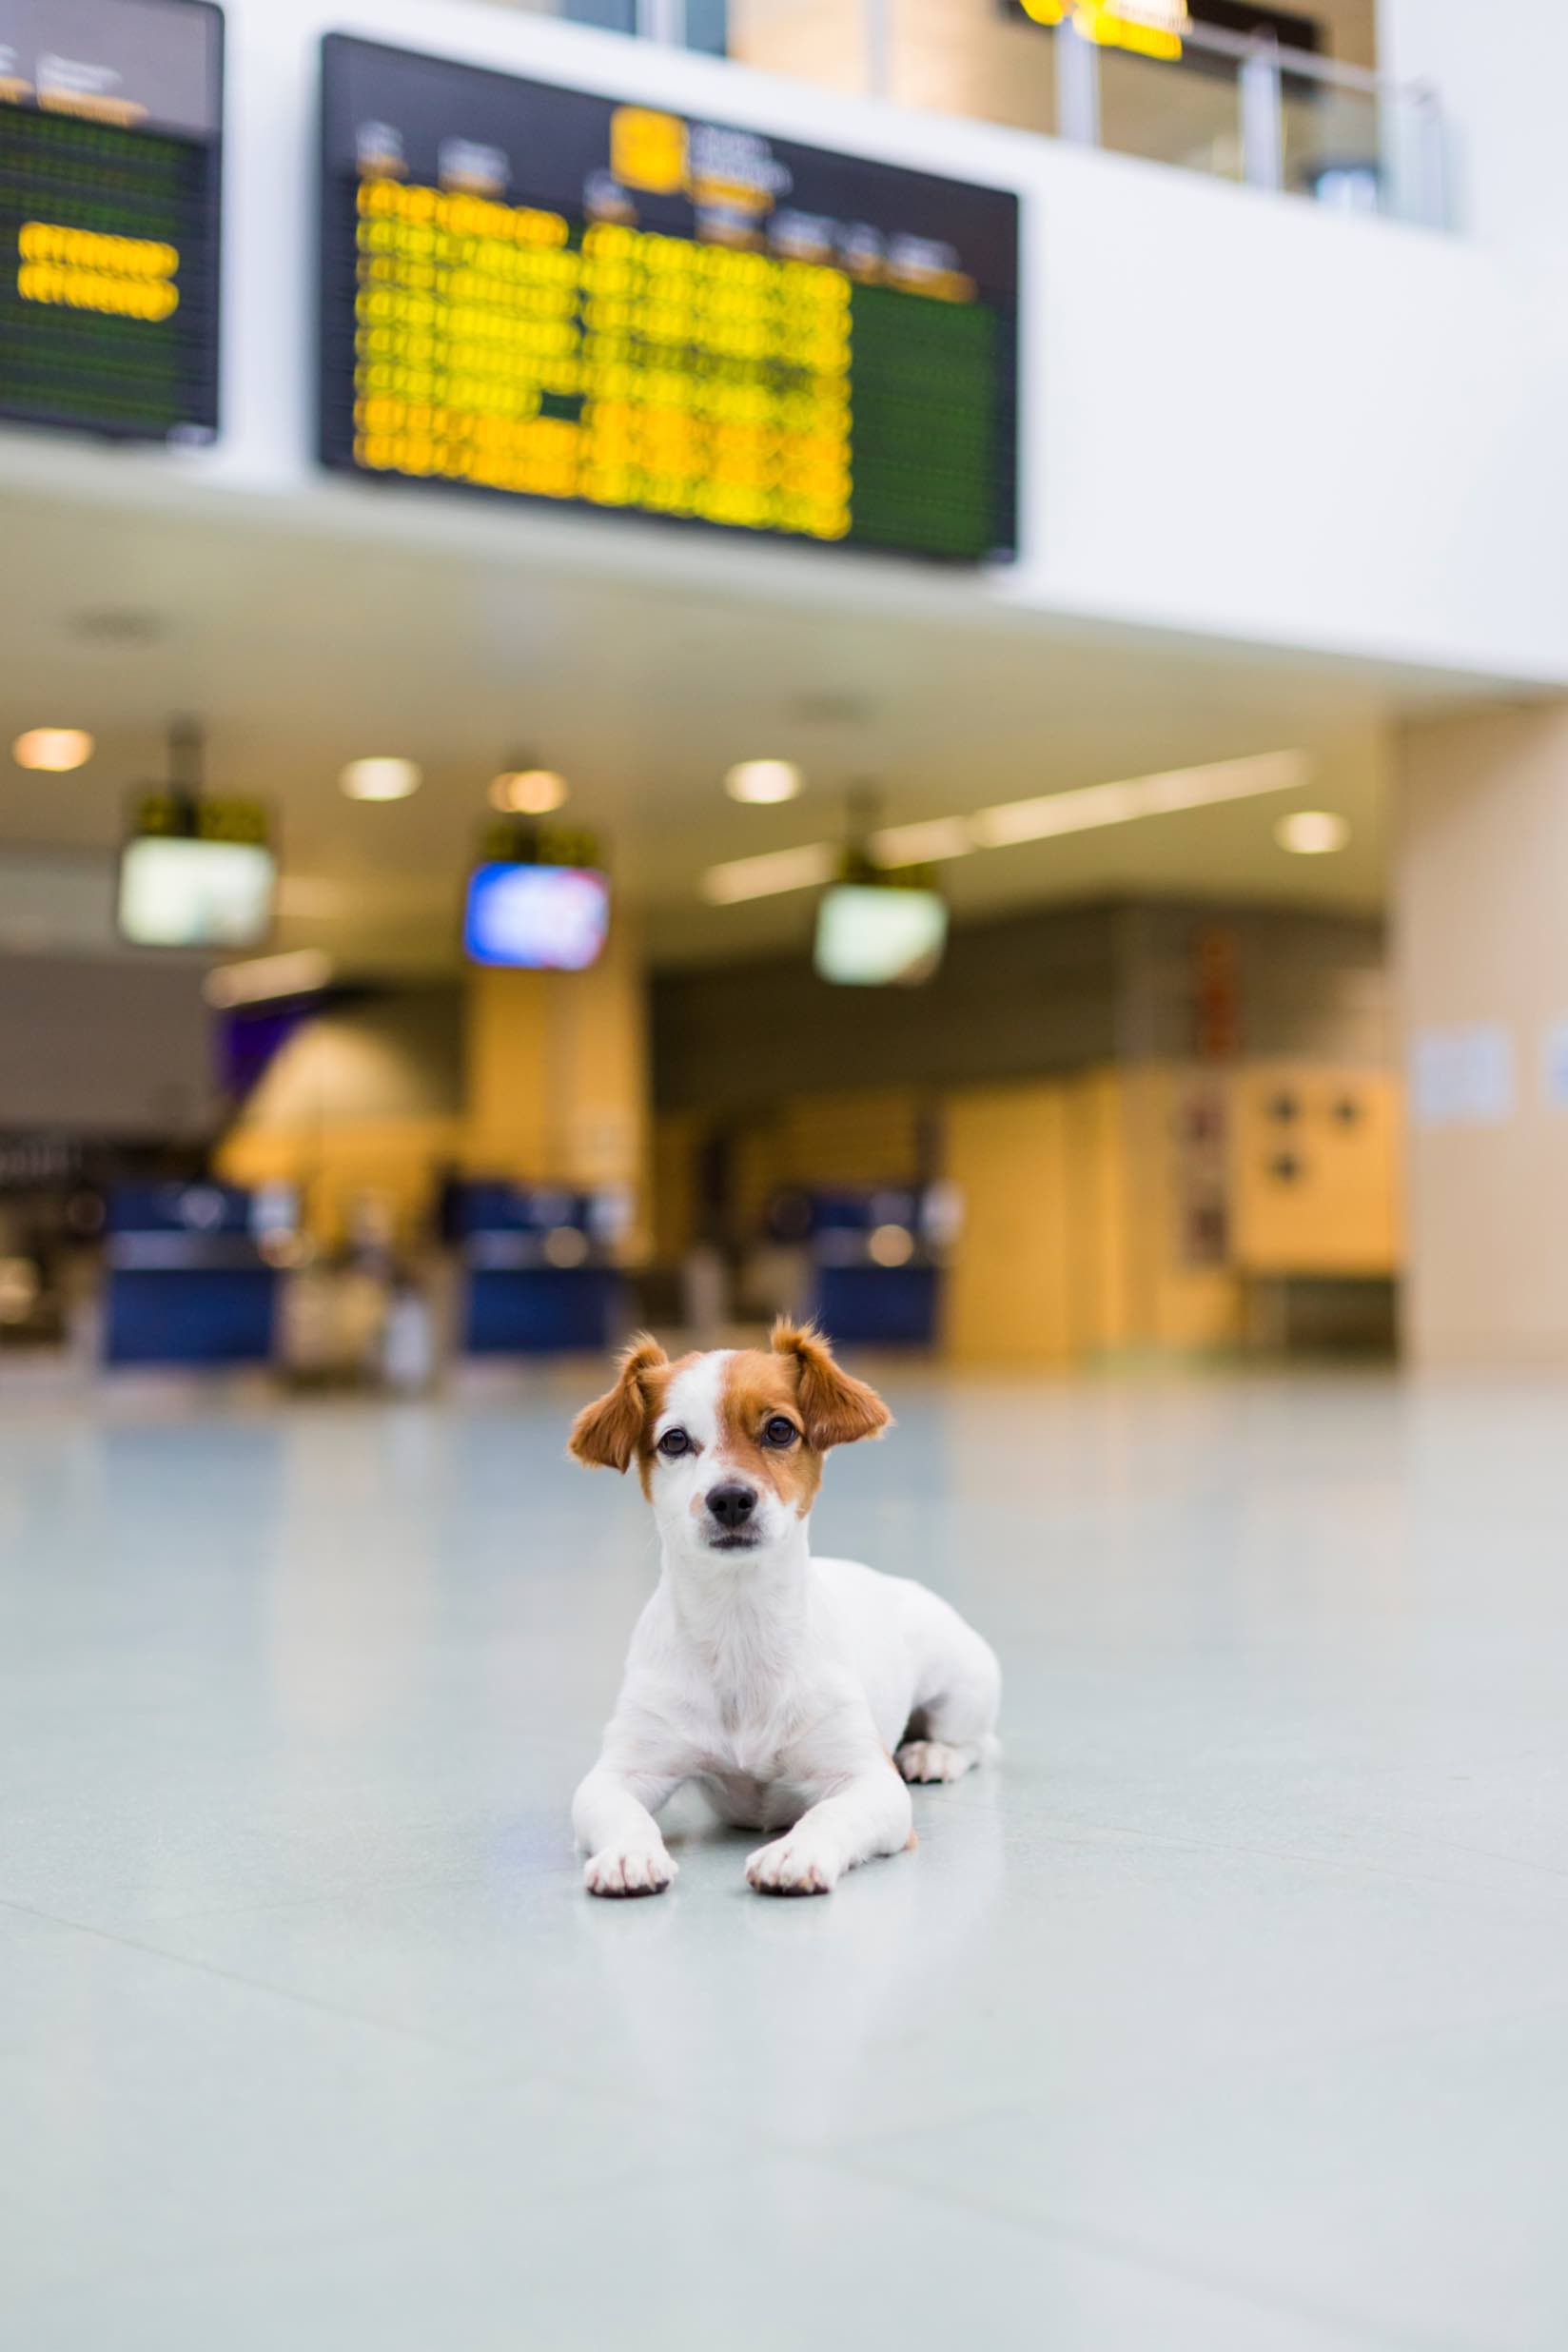 This pup is happy to behave at the airport, especially thanks to training from Dog Training Elite in Baton Rouge.